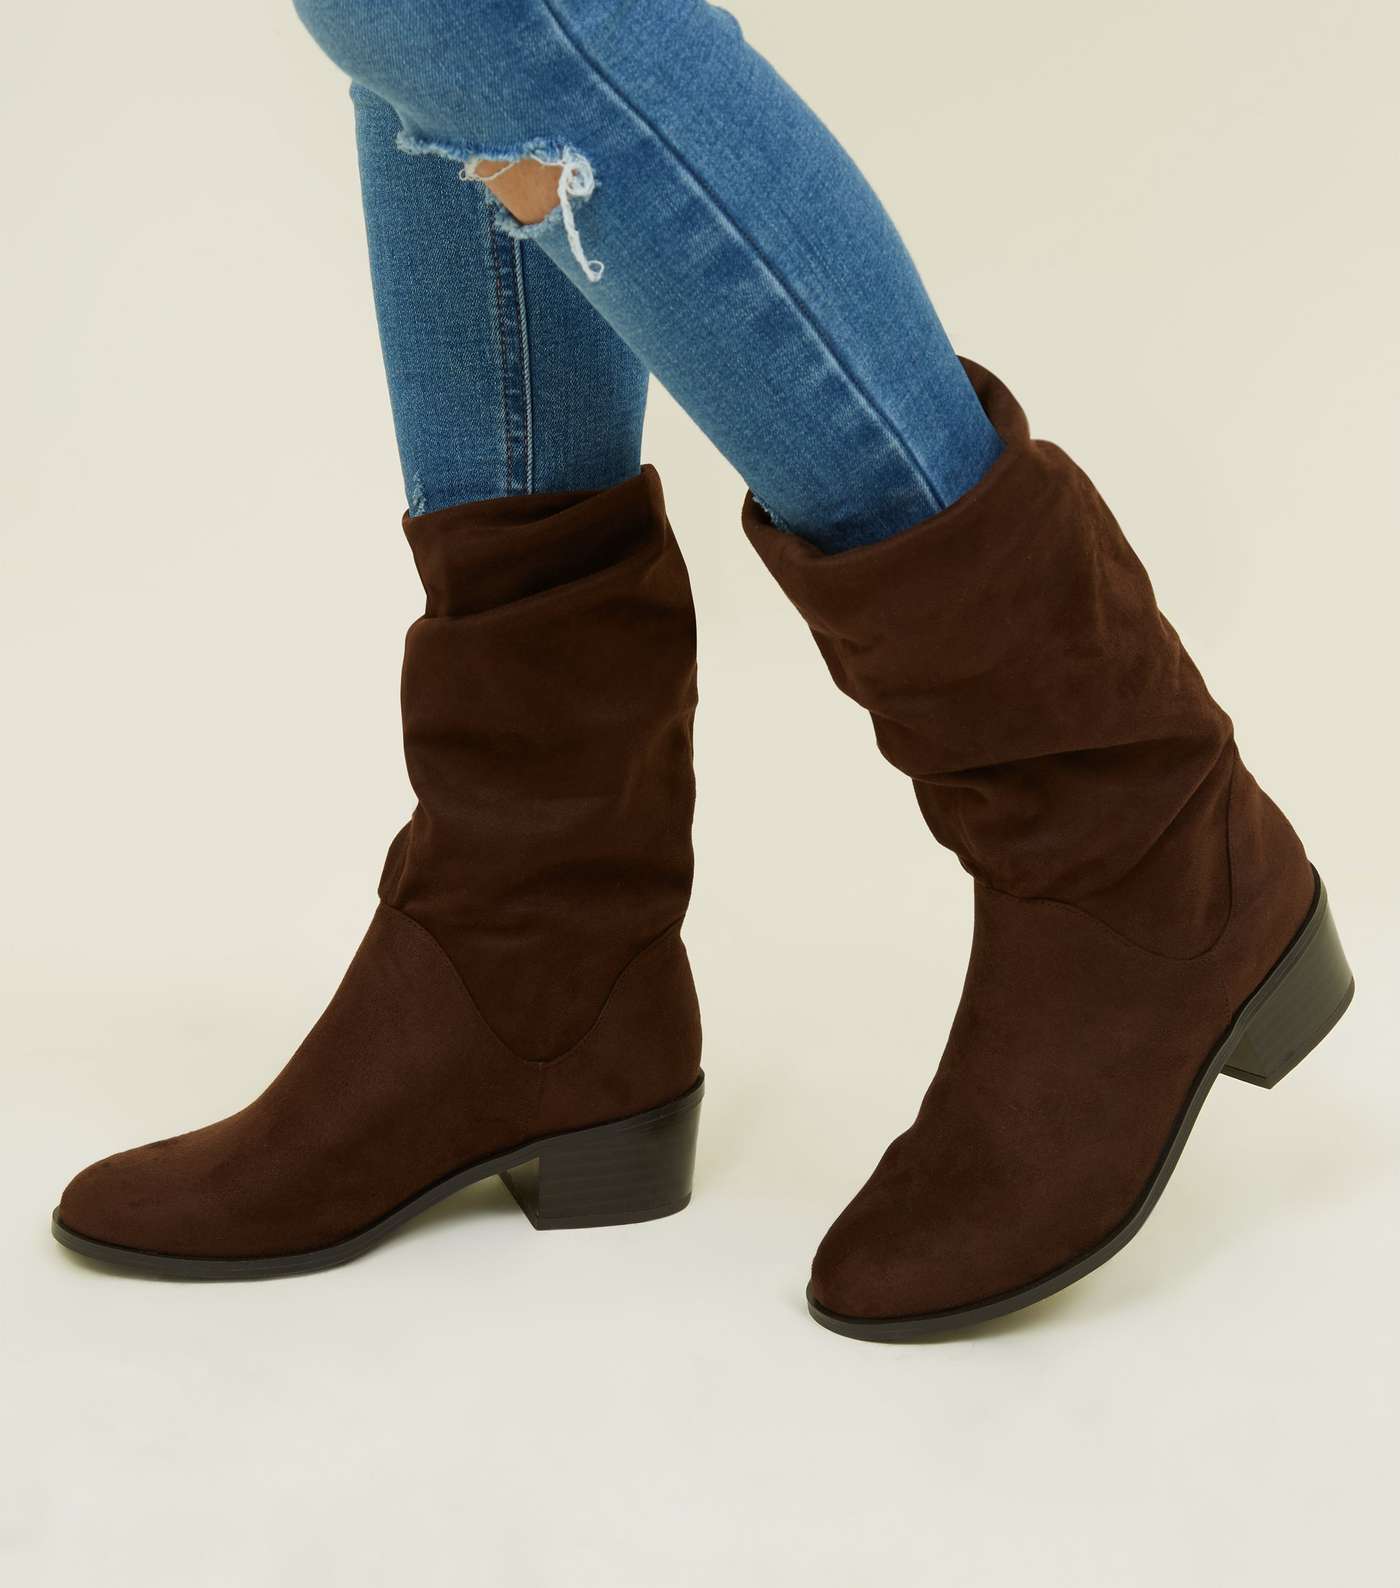 Girls Rust Suedette Slouch Calf Boots Image 2